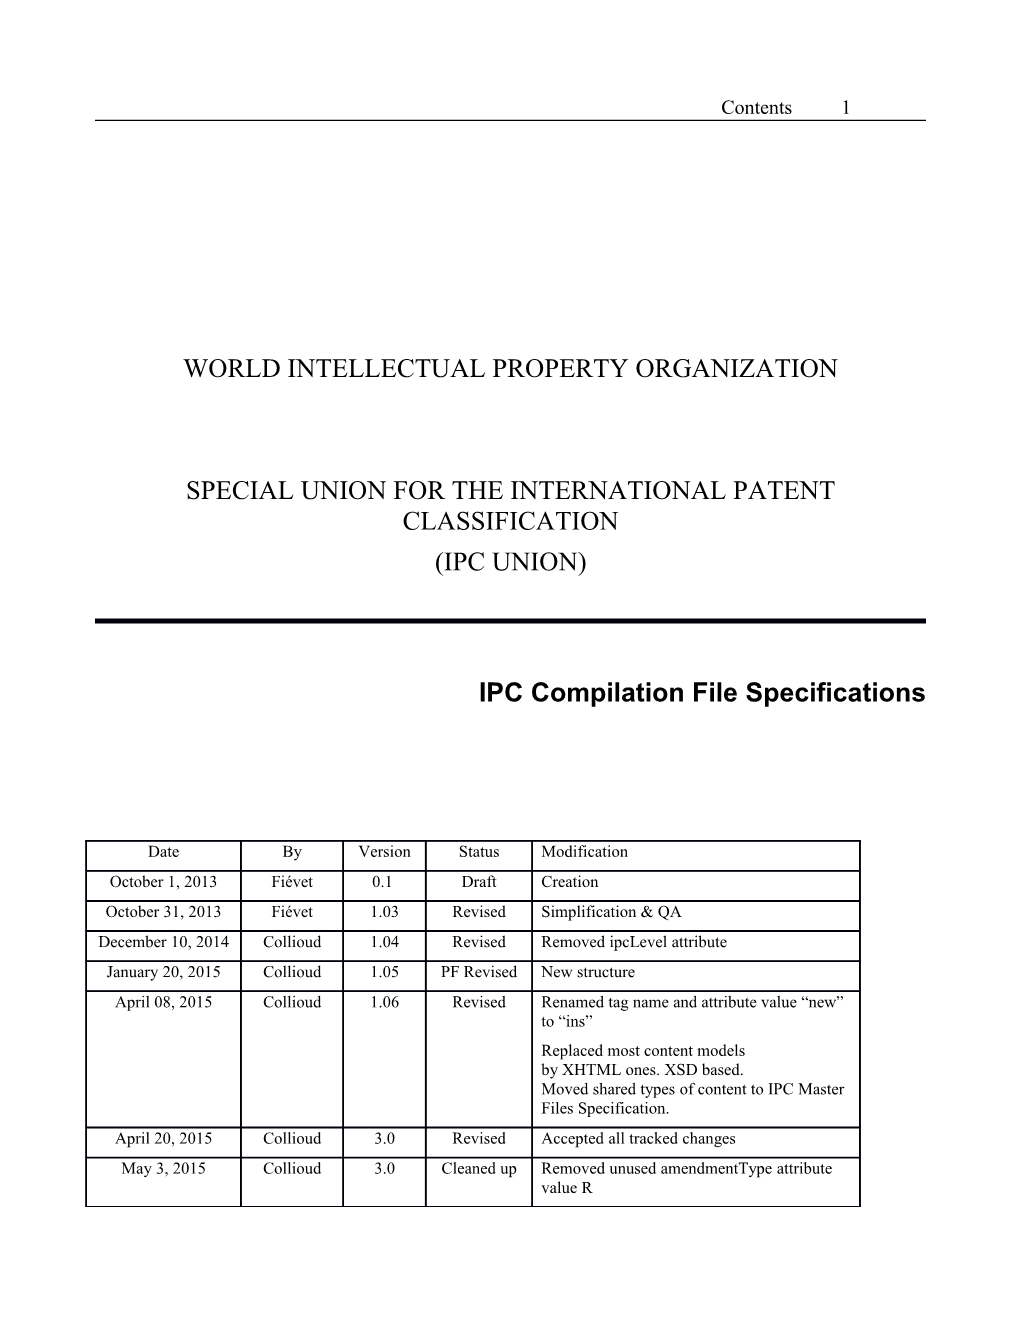 IPC Compilation File Specifications